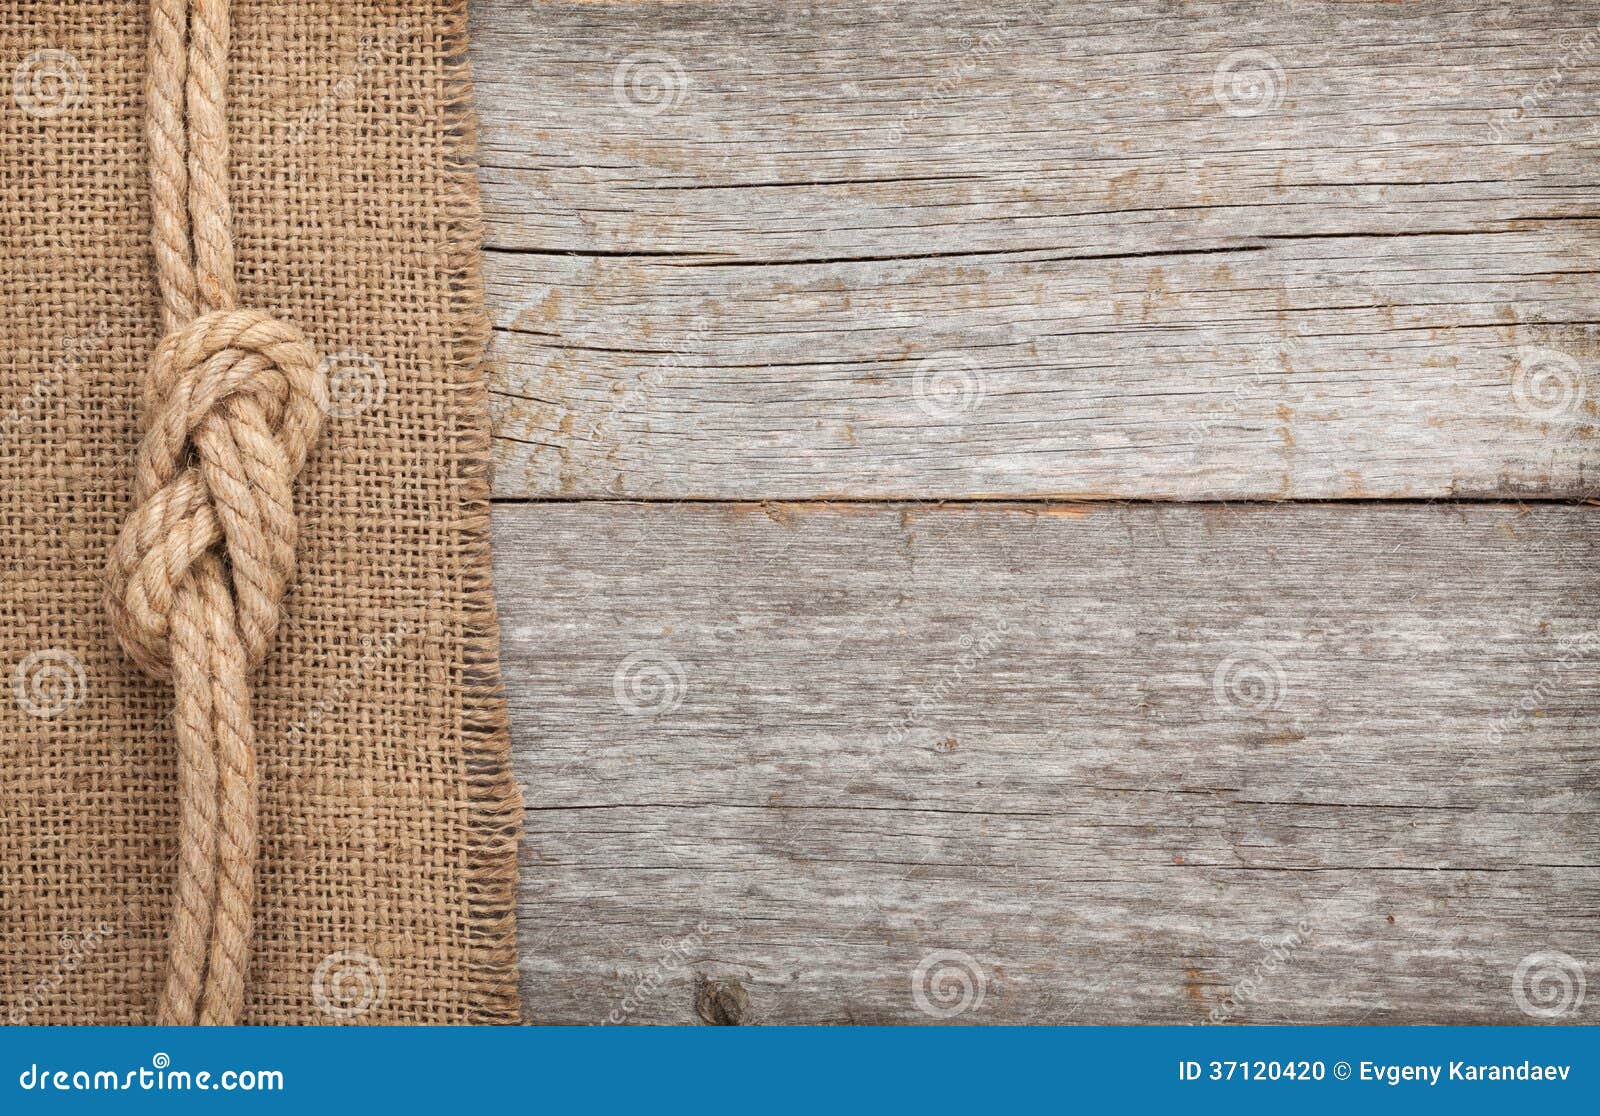 Ship Rope On Wood And Burlap Texture Background Stock ...